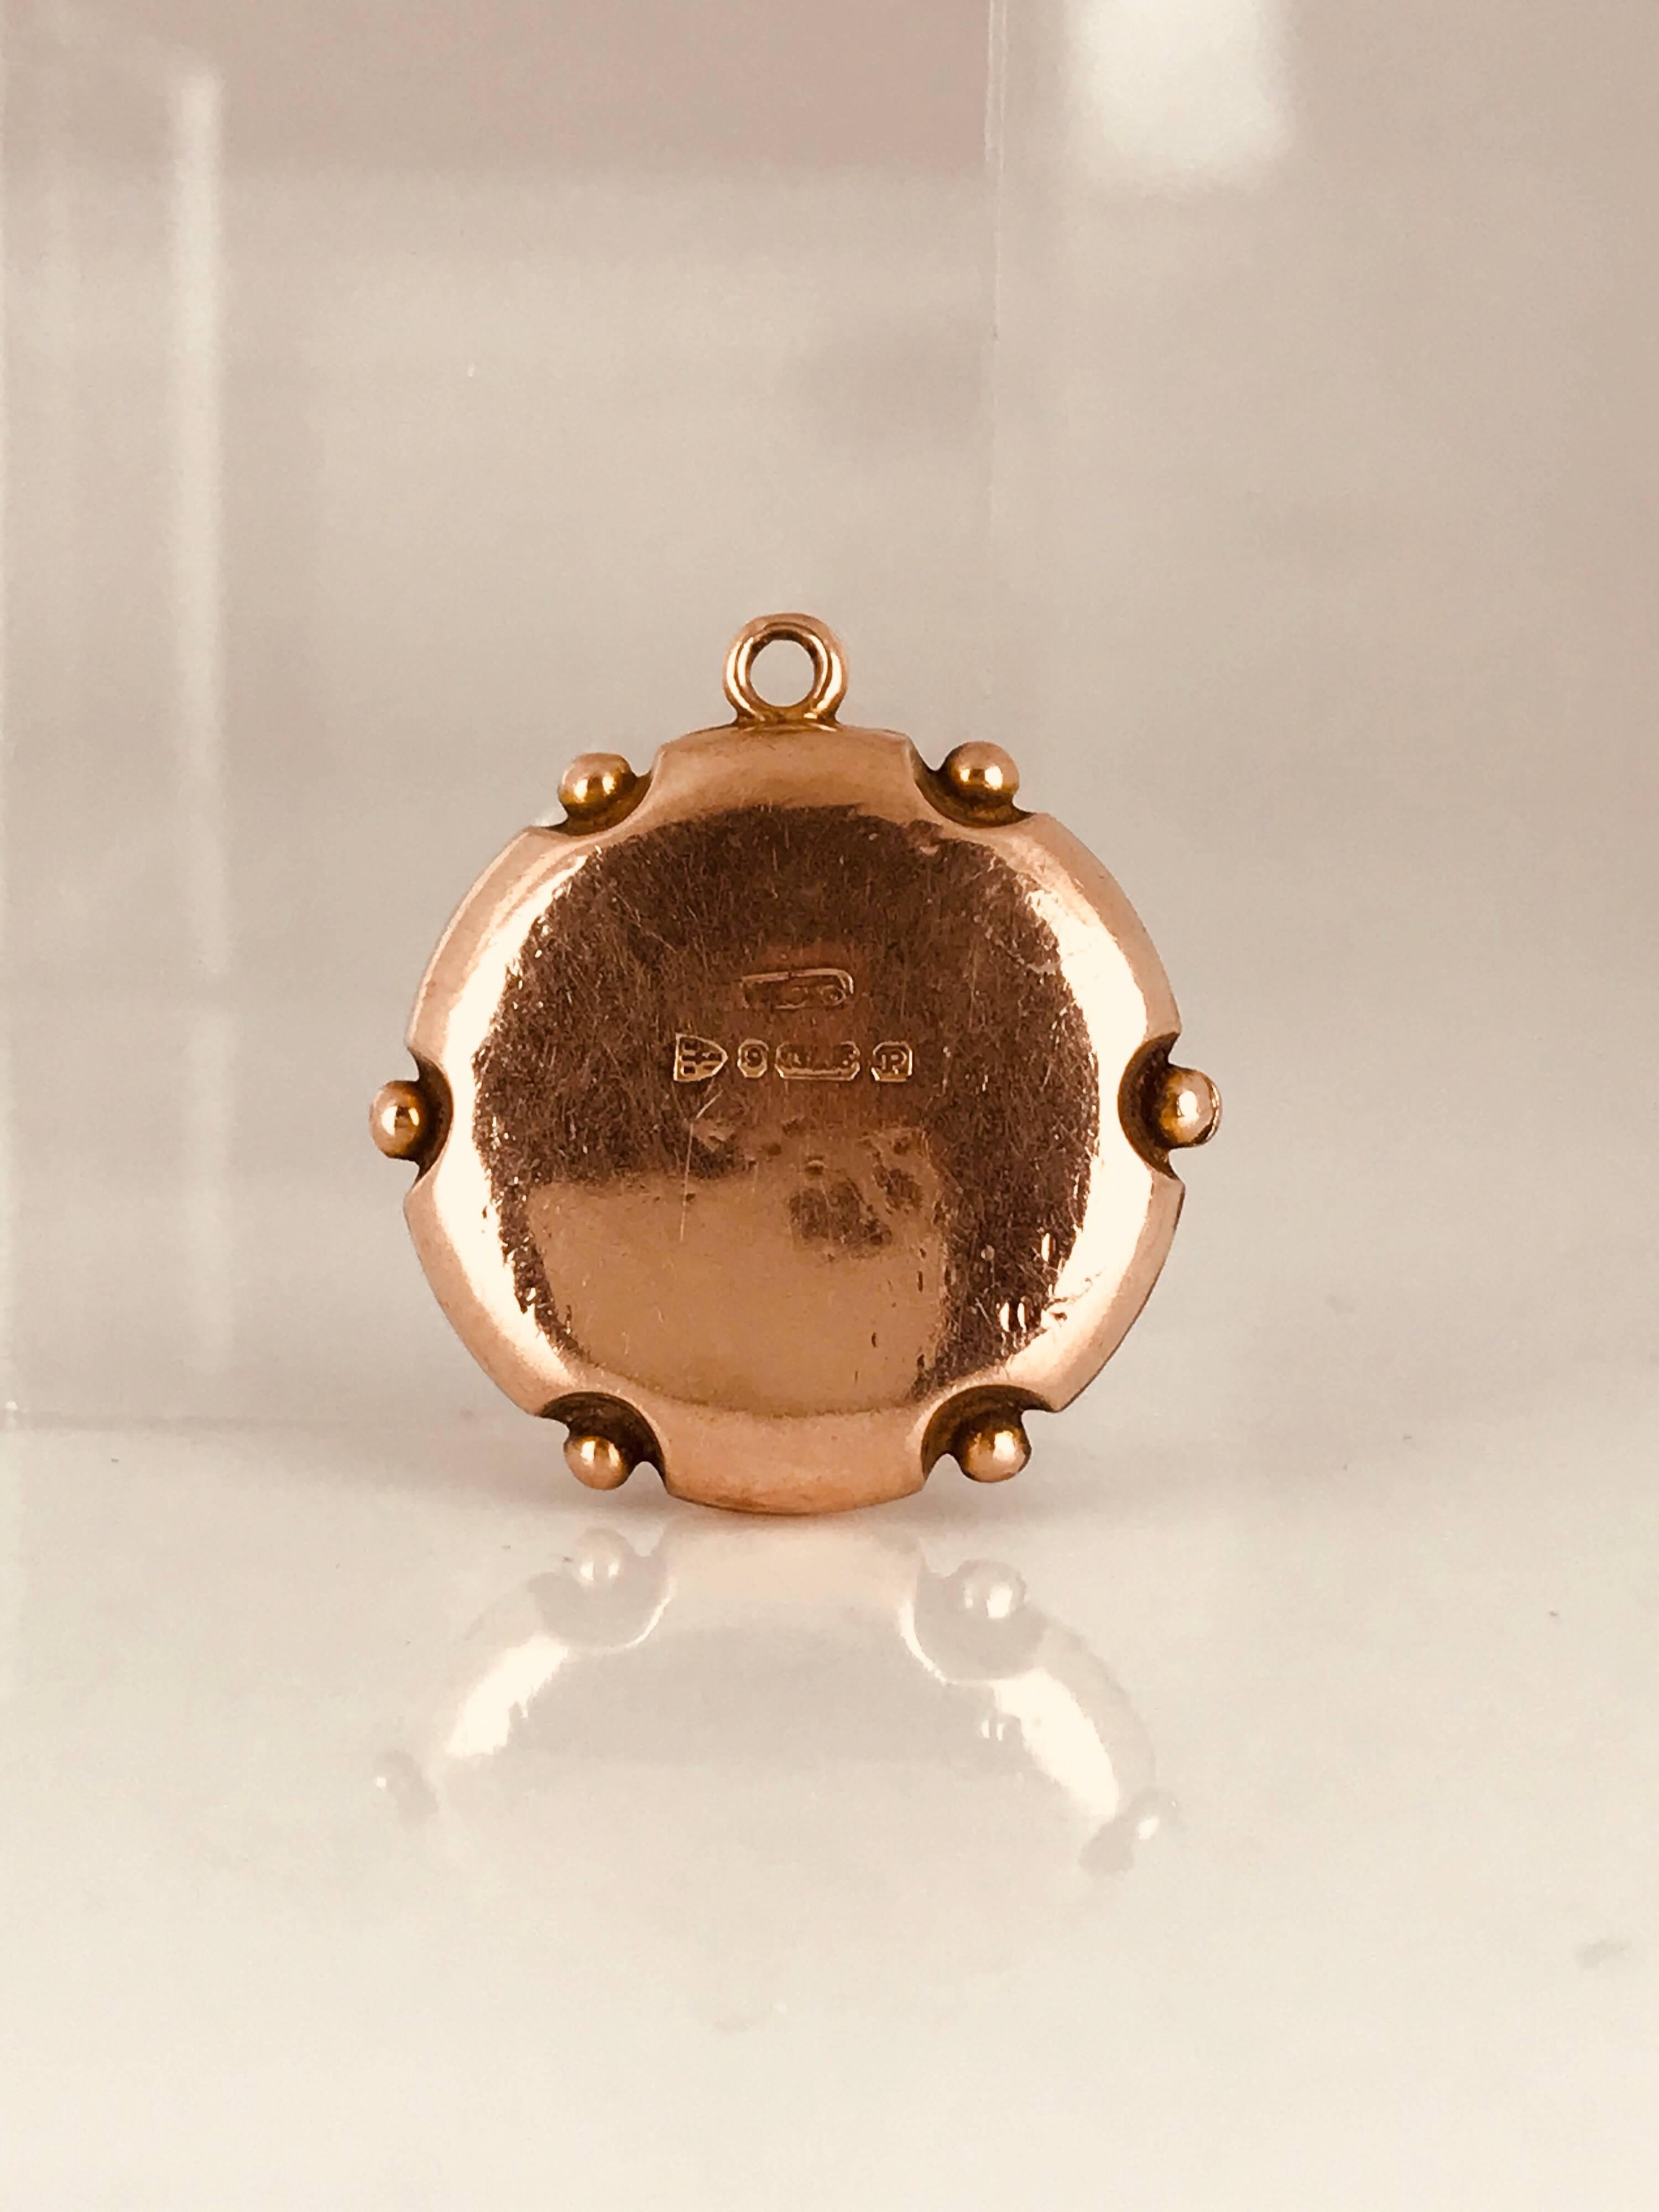 Compass made in a 9 Karat Rose Gold metal. Victorian ERA. 
All Hand Painted.

Stamping in back shows hallmarks not very clear.  European stamping.

GIA Gemologist Inspected